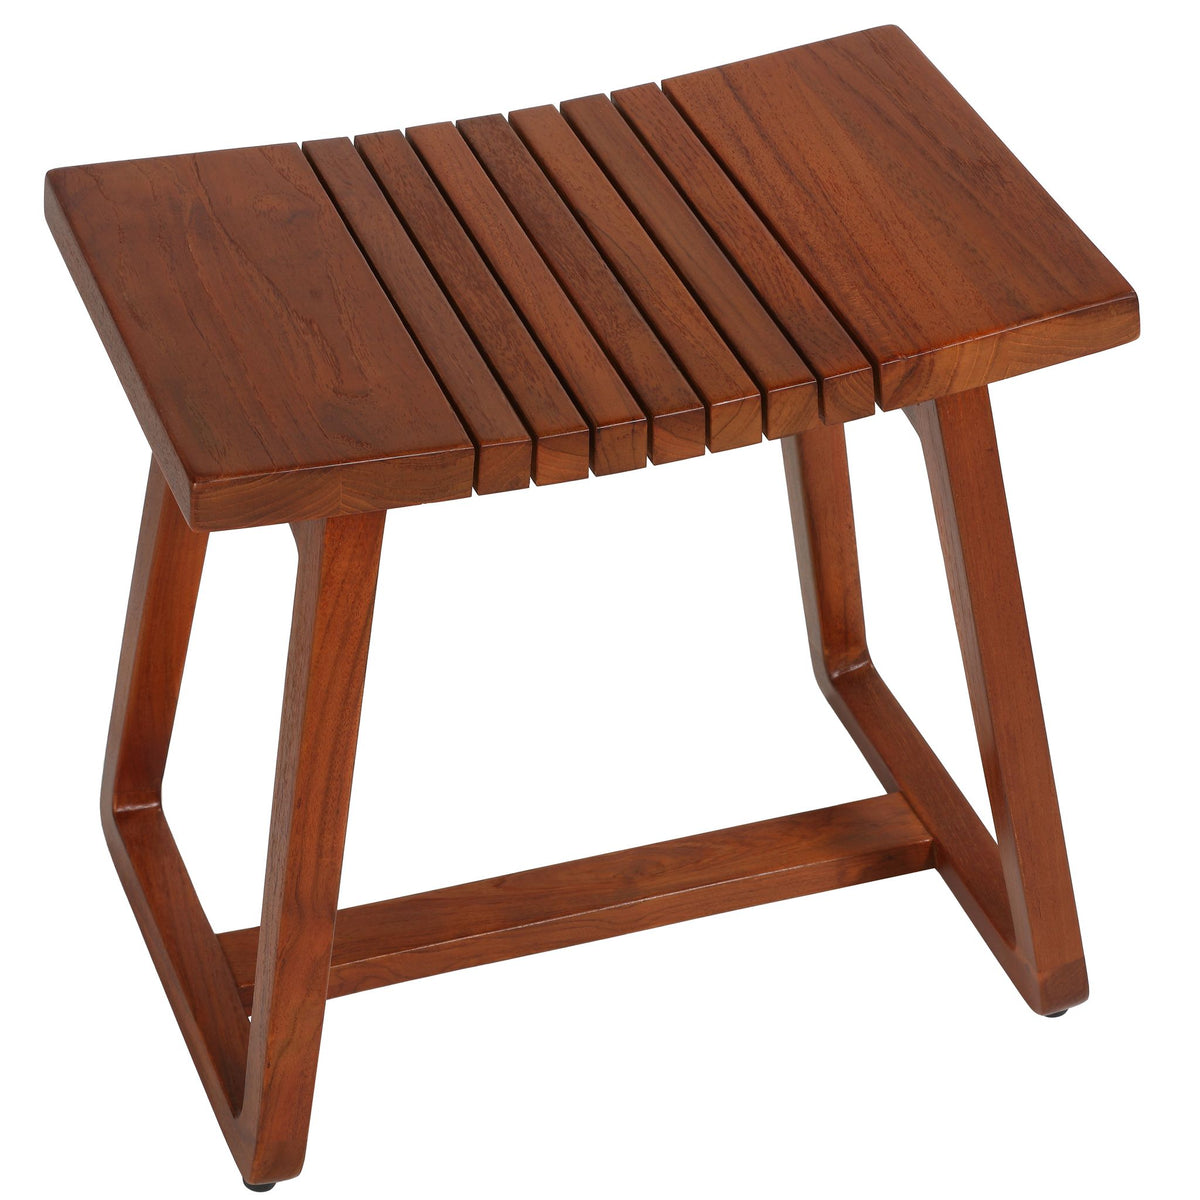 Bare Decor Hanoi Shower and Spa Stool in Solid Teak Wood, 19x14x17h